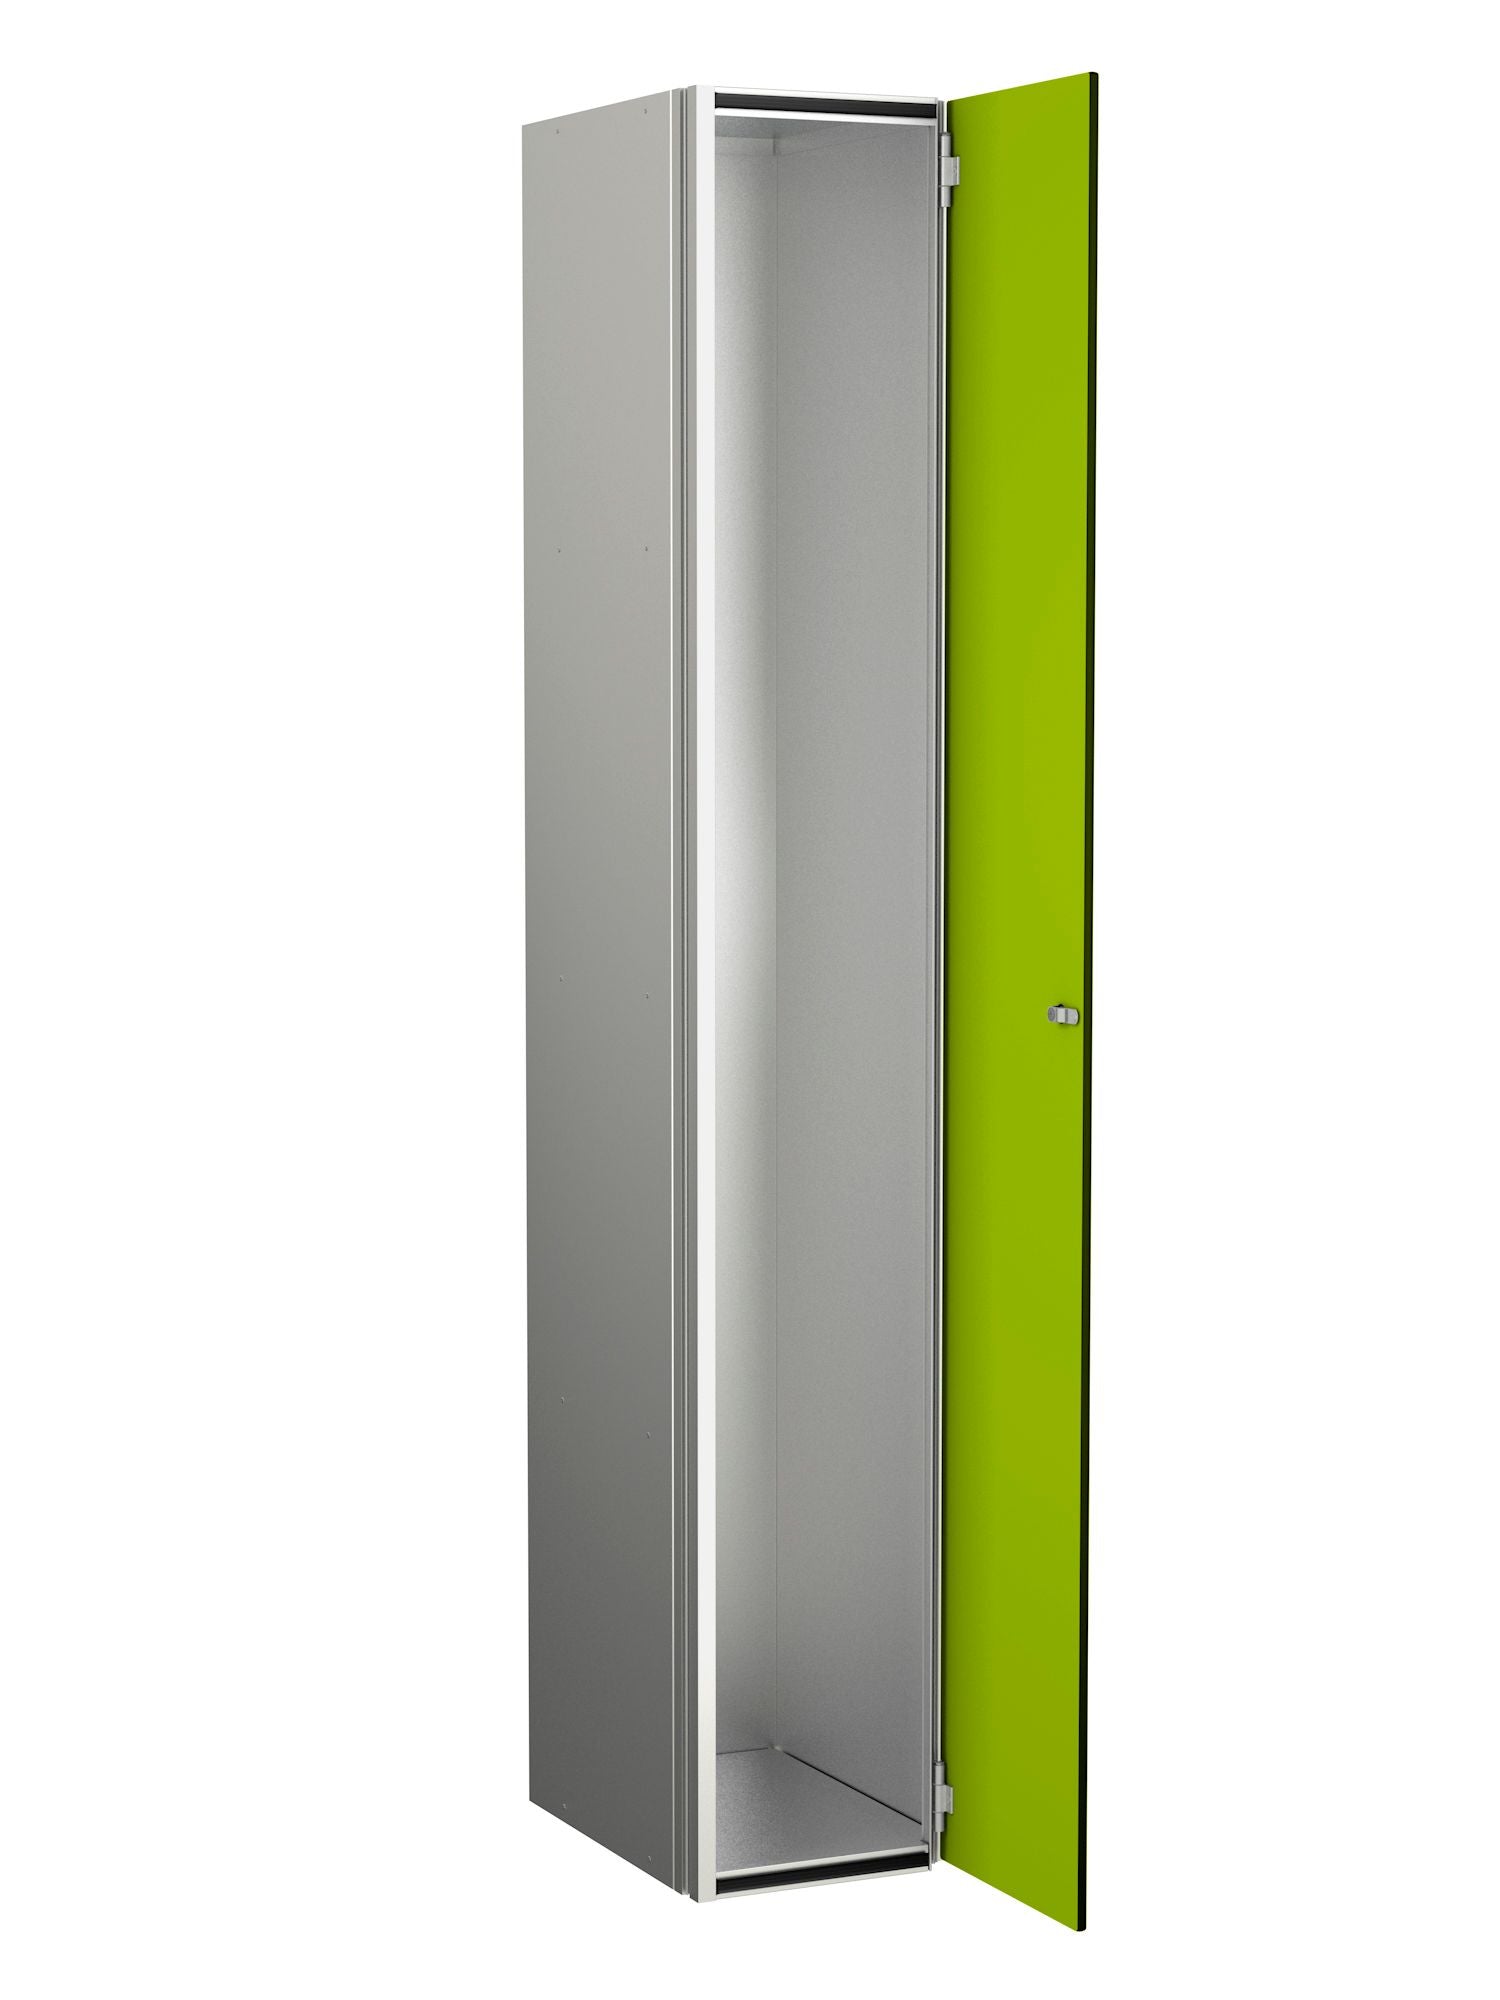 ZENBOX WET AREA LOCKERS WITH SGL DOORS - LIME GREEN 1 DOOR Storage Lockers > Lockers > Cabinets > Storage > Probe > One Stop For Safety   